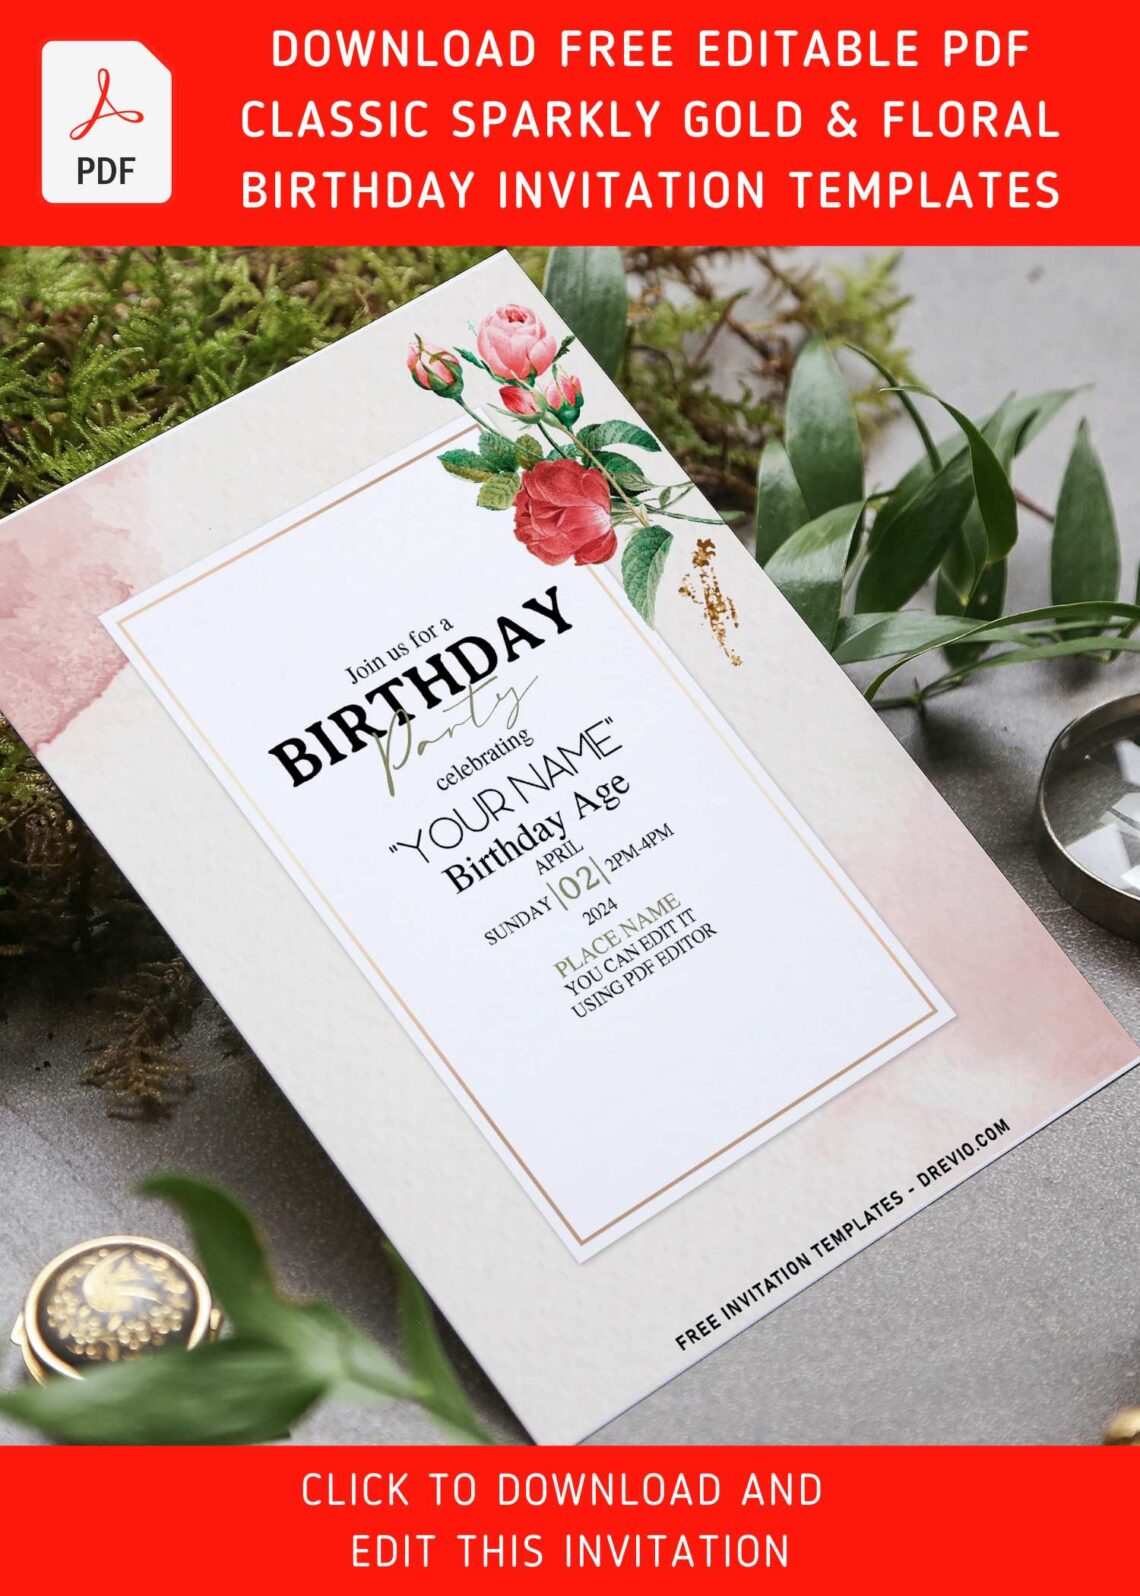 (Free Editable PDF) Classy Sparkly Gold And Greenery Birthday Invitation Templates with romantic red rose